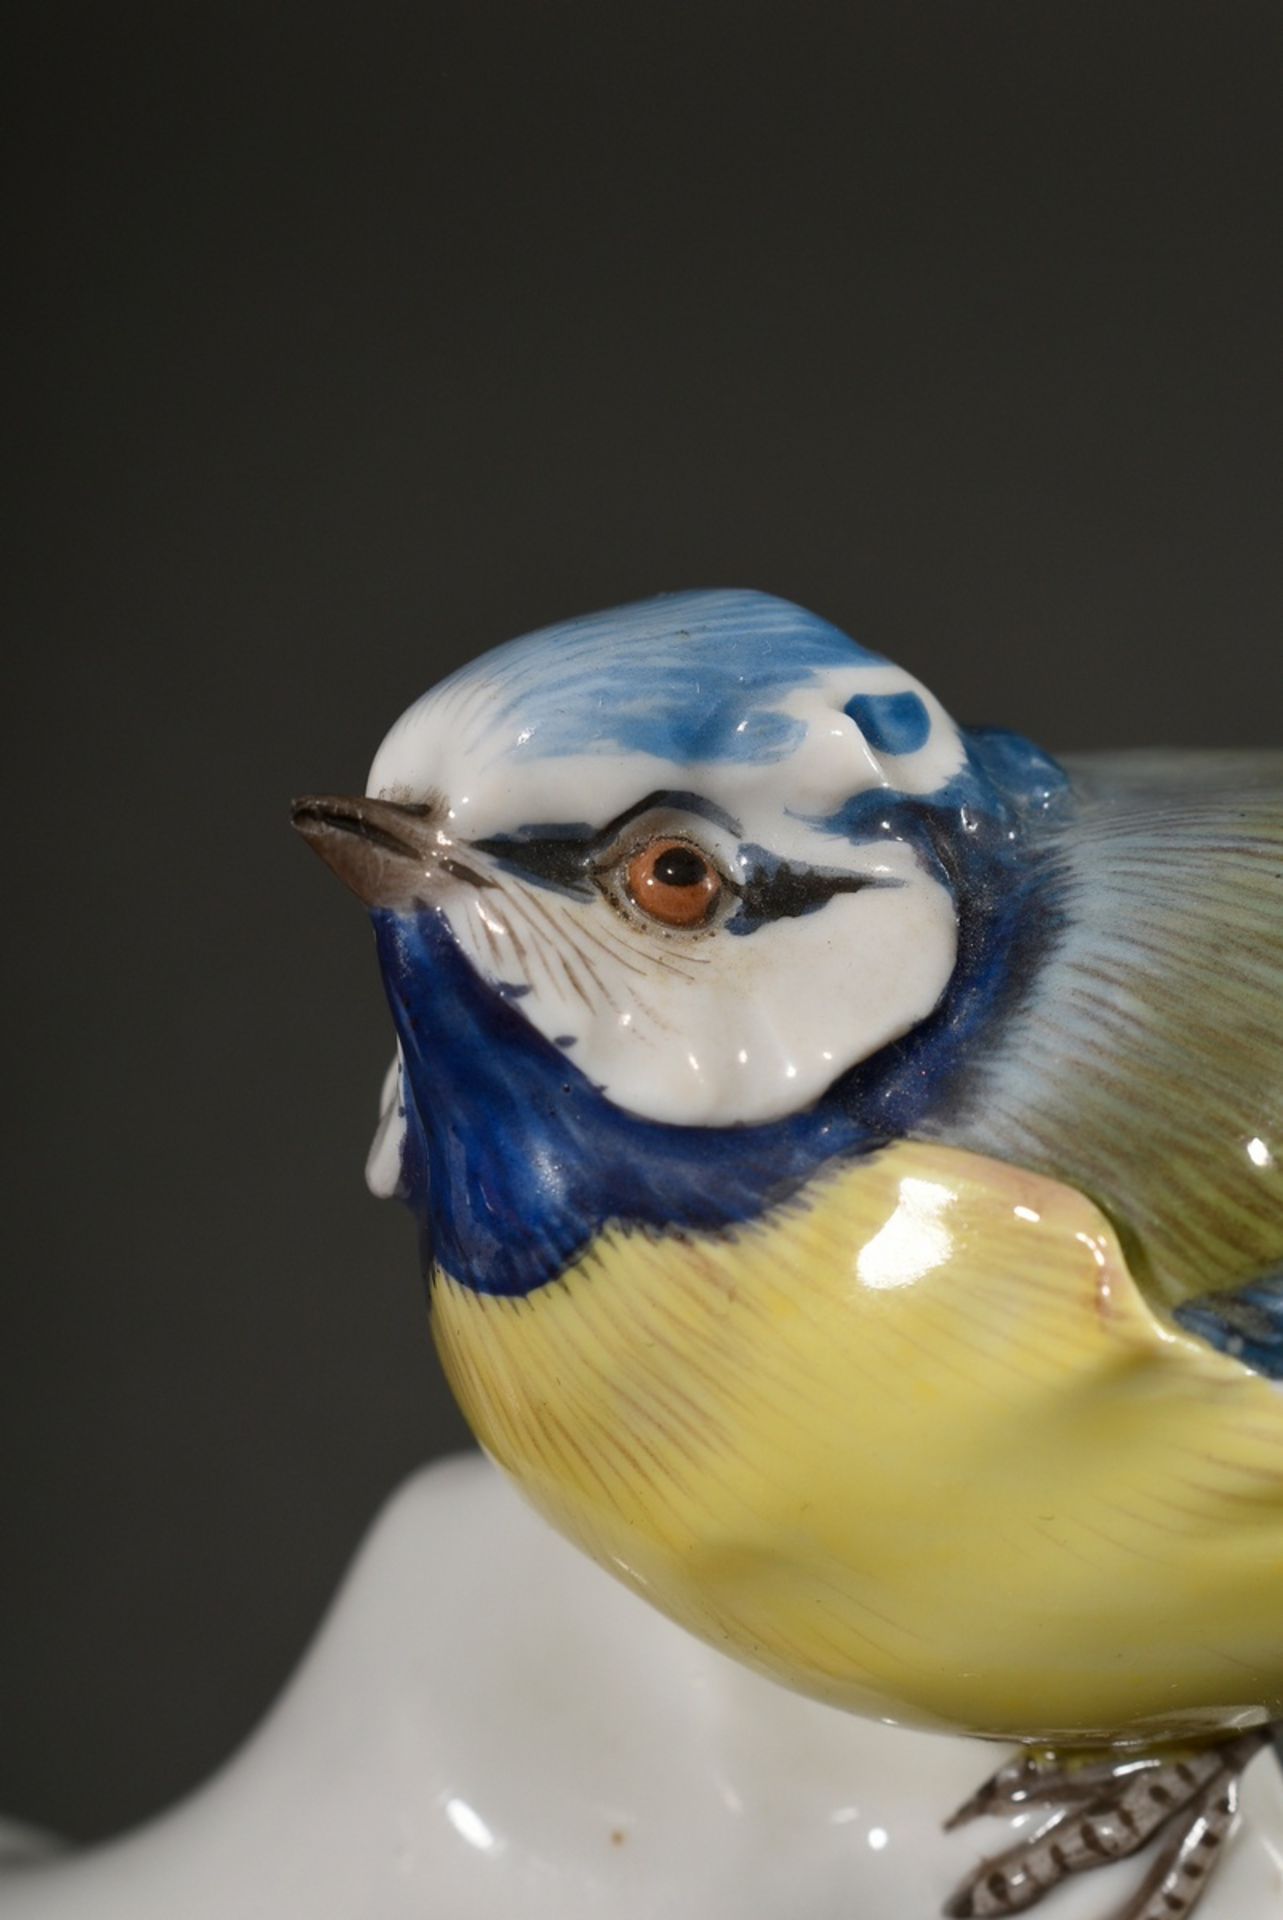 Polychrome painted Meissen figurine "Blue Tit", 20th c., model no.: 77270, shaper no.: 151, year ma - Image 4 of 5